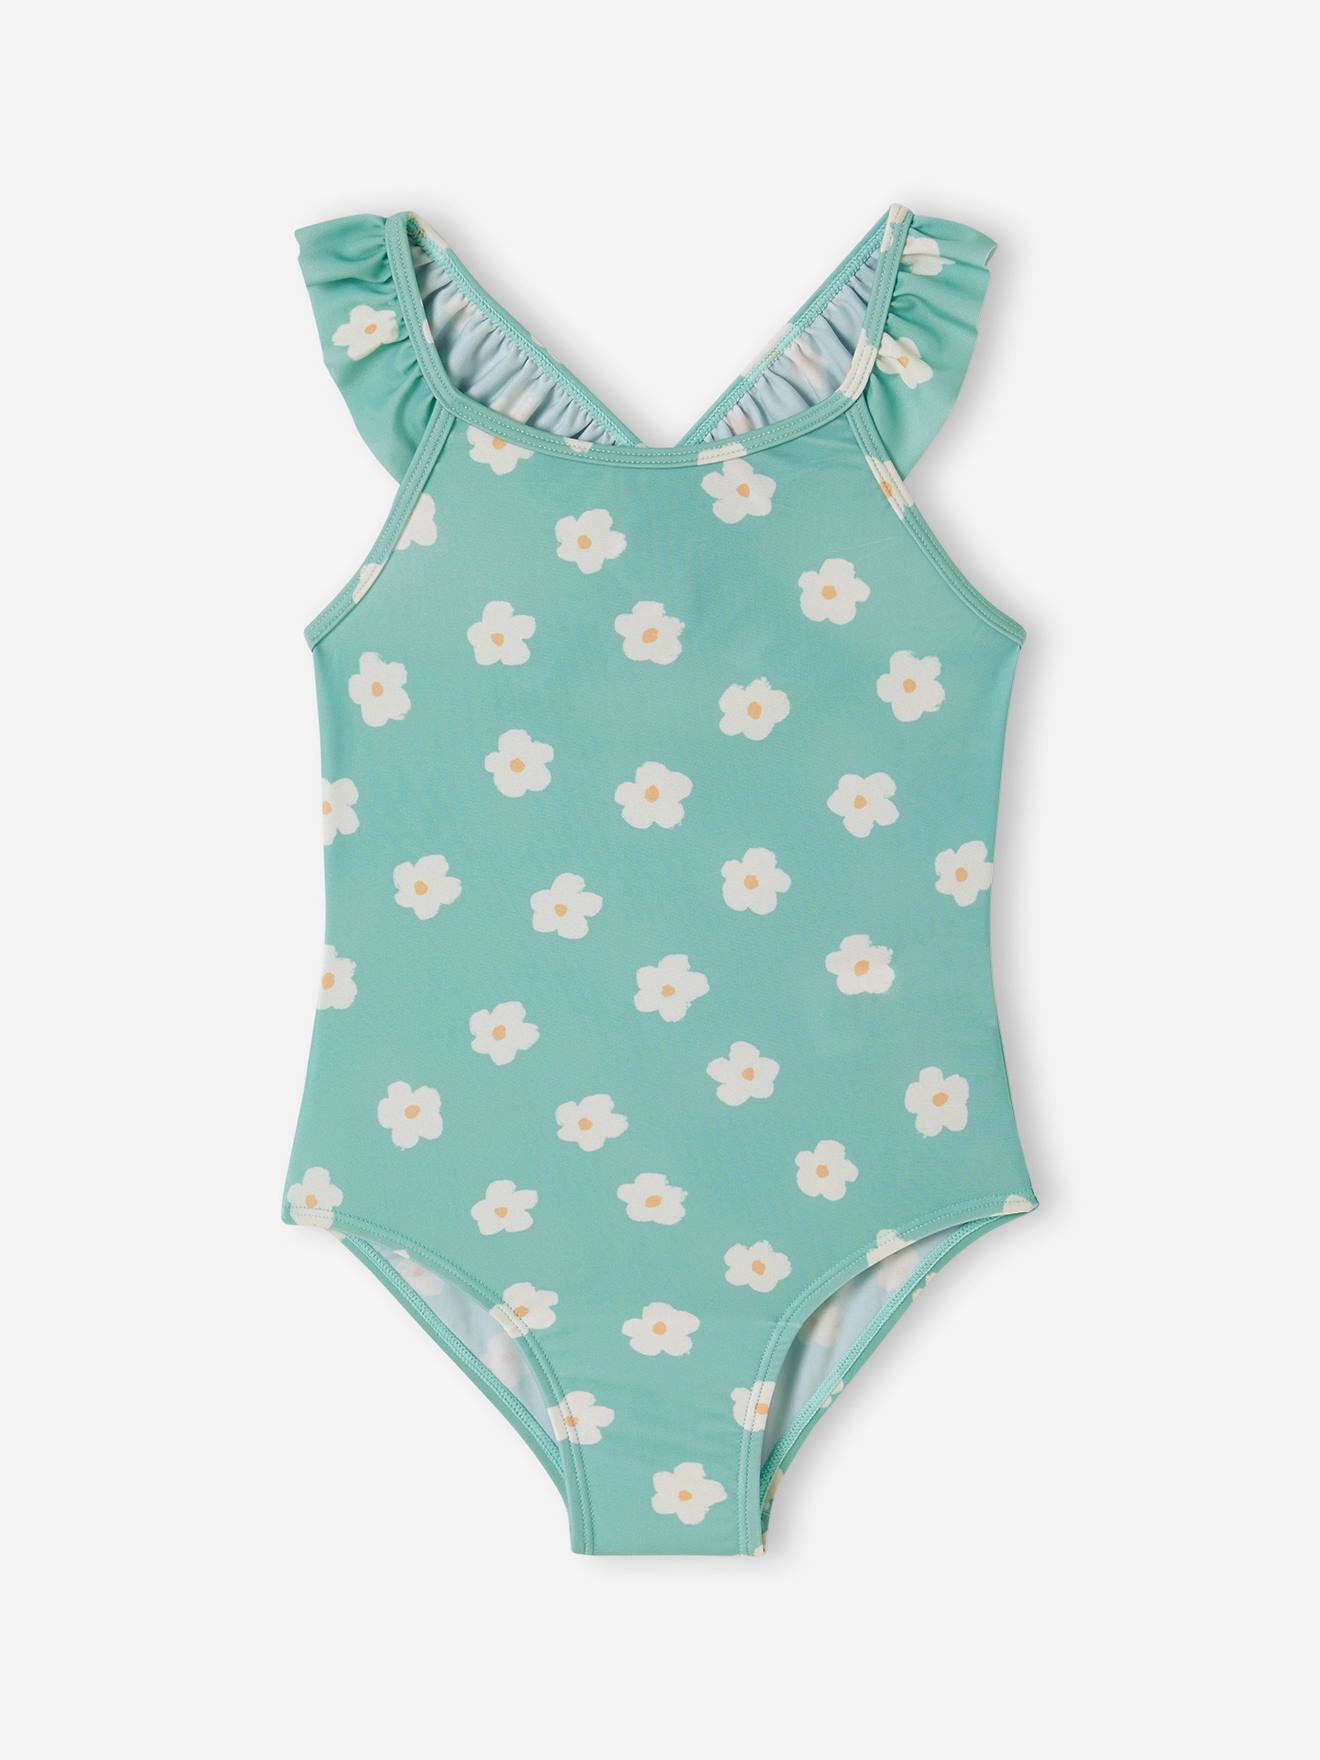 Floral Print Swimsuit for Girls aqua green